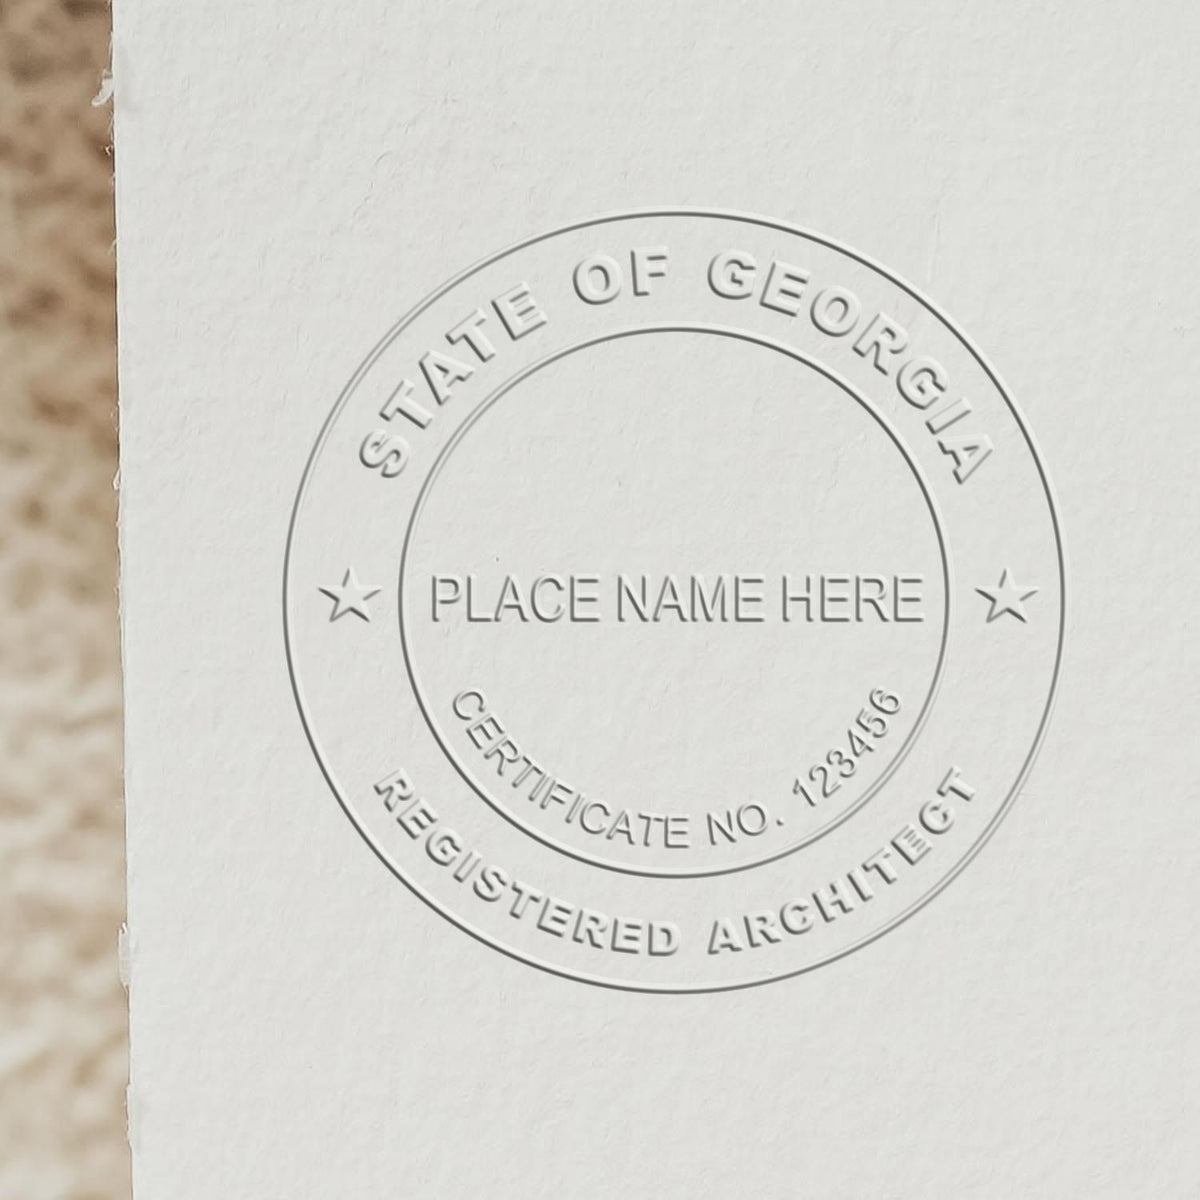 The Gift Georgia Architect Seal stamp impression comes to life with a crisp, detailed image stamped on paper - showcasing true professional quality.